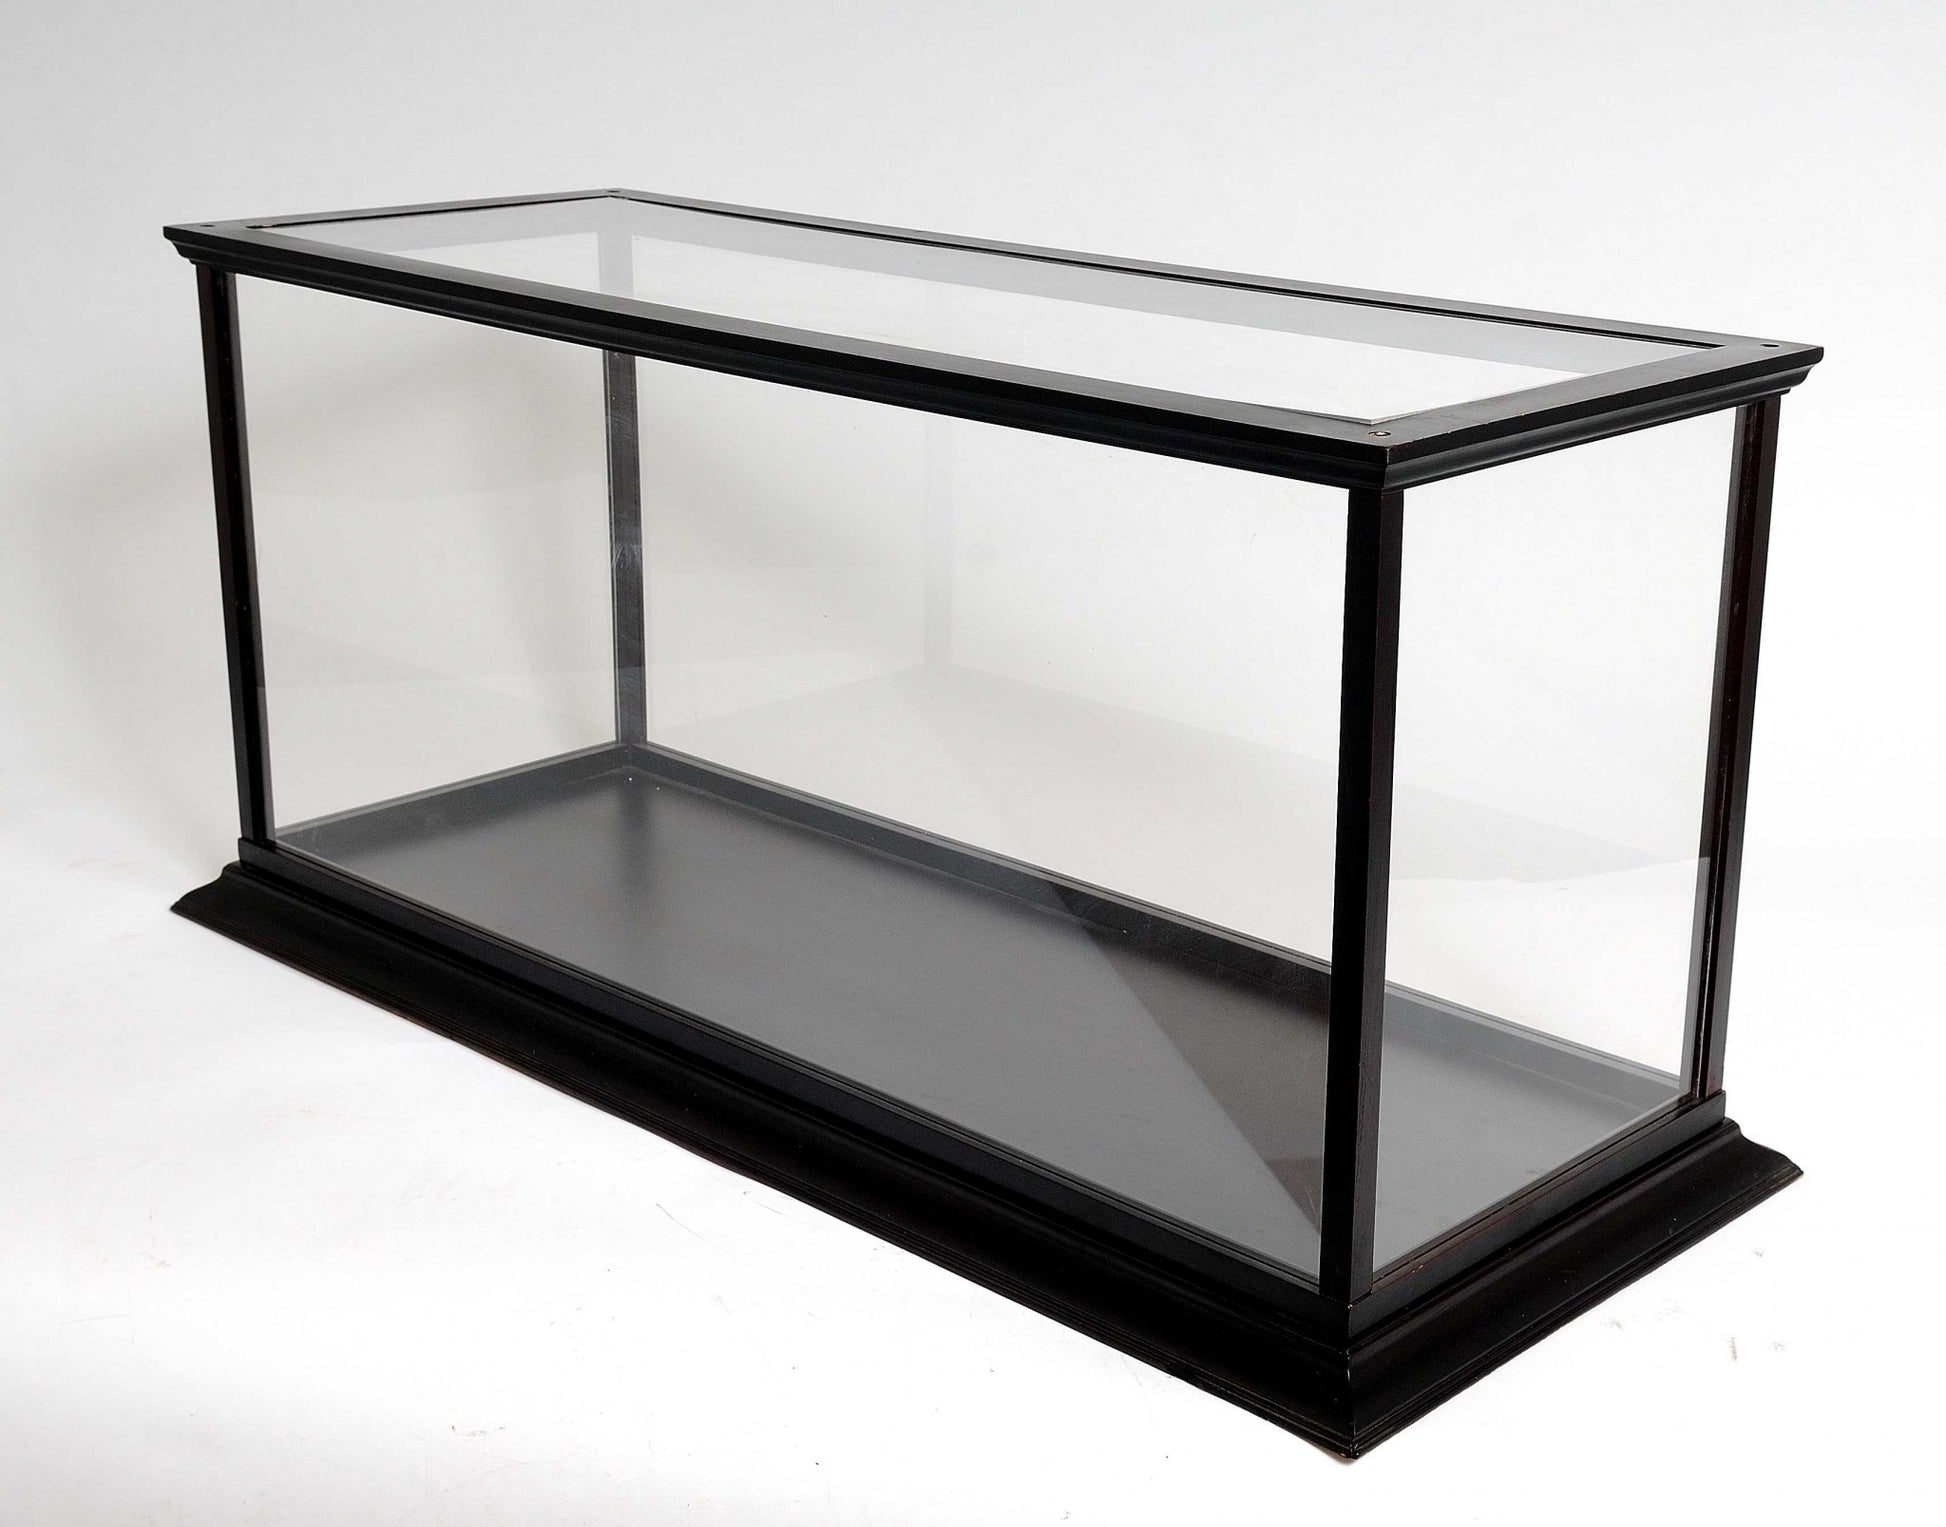 14" X 37.5" X 15" Display Case For Speed Boat - FurniFindUSA